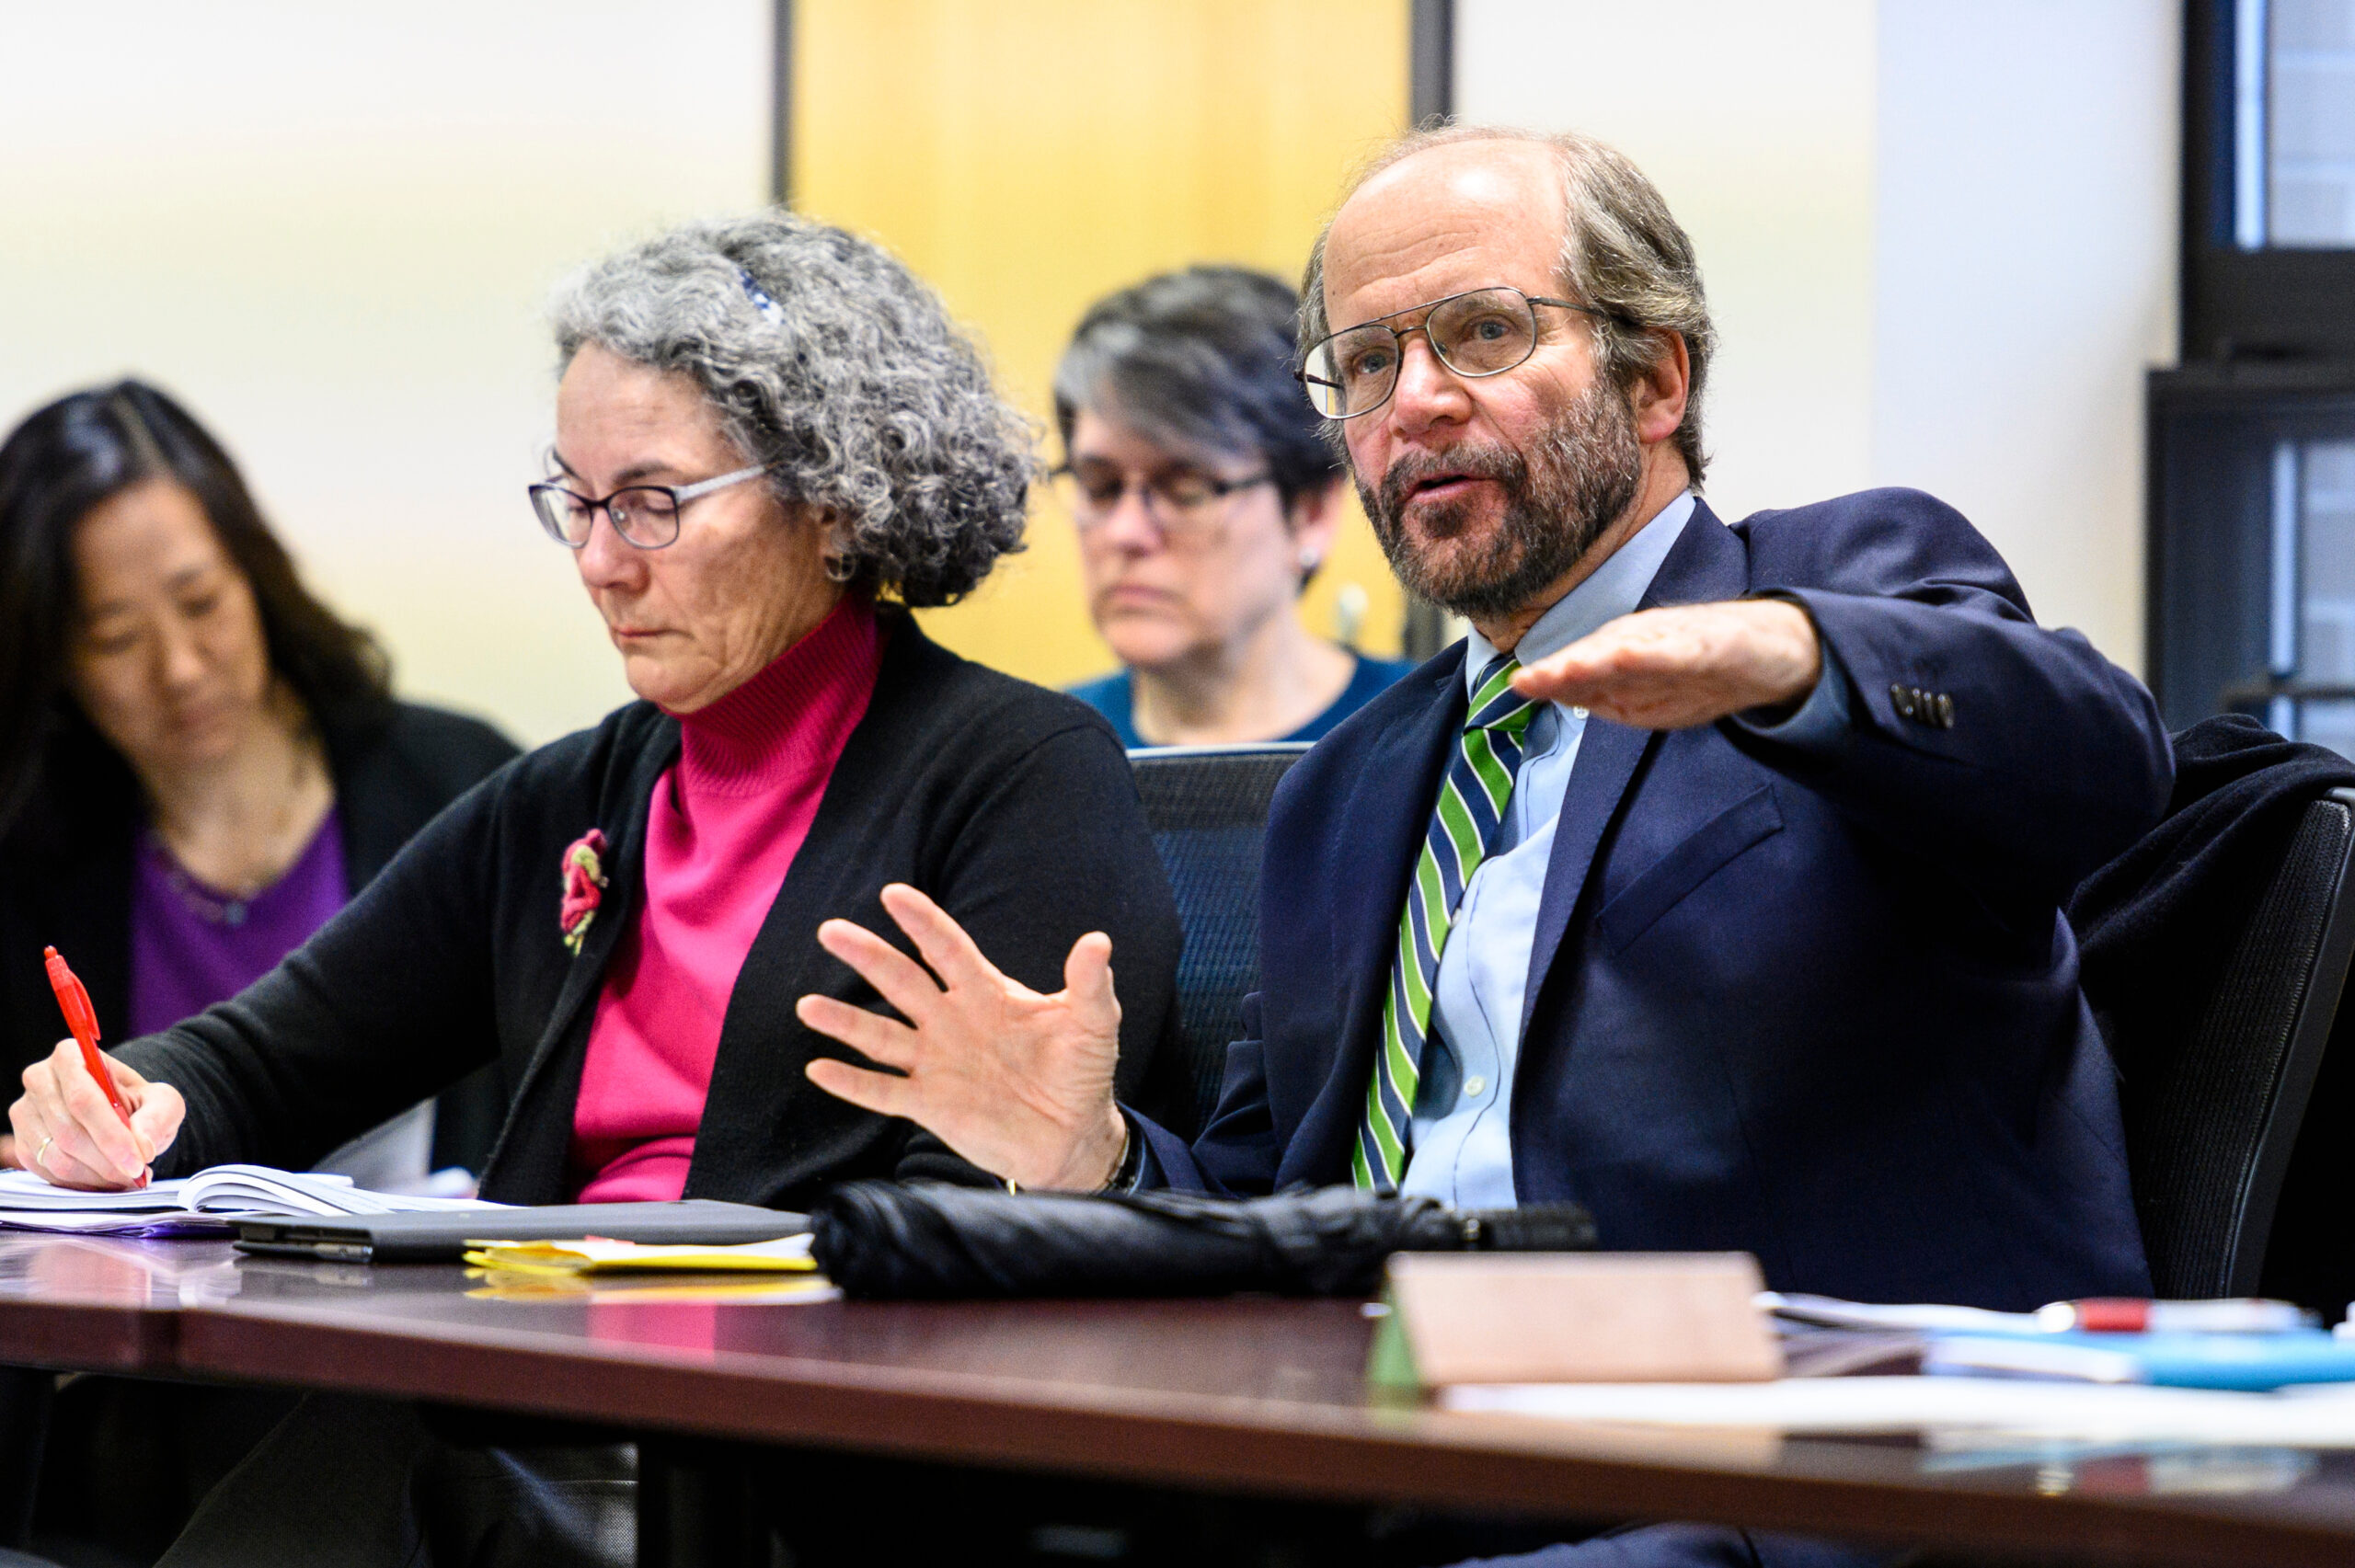 The dean of the School of Medicine and Public Heath, speaks during a Deans Council meeting